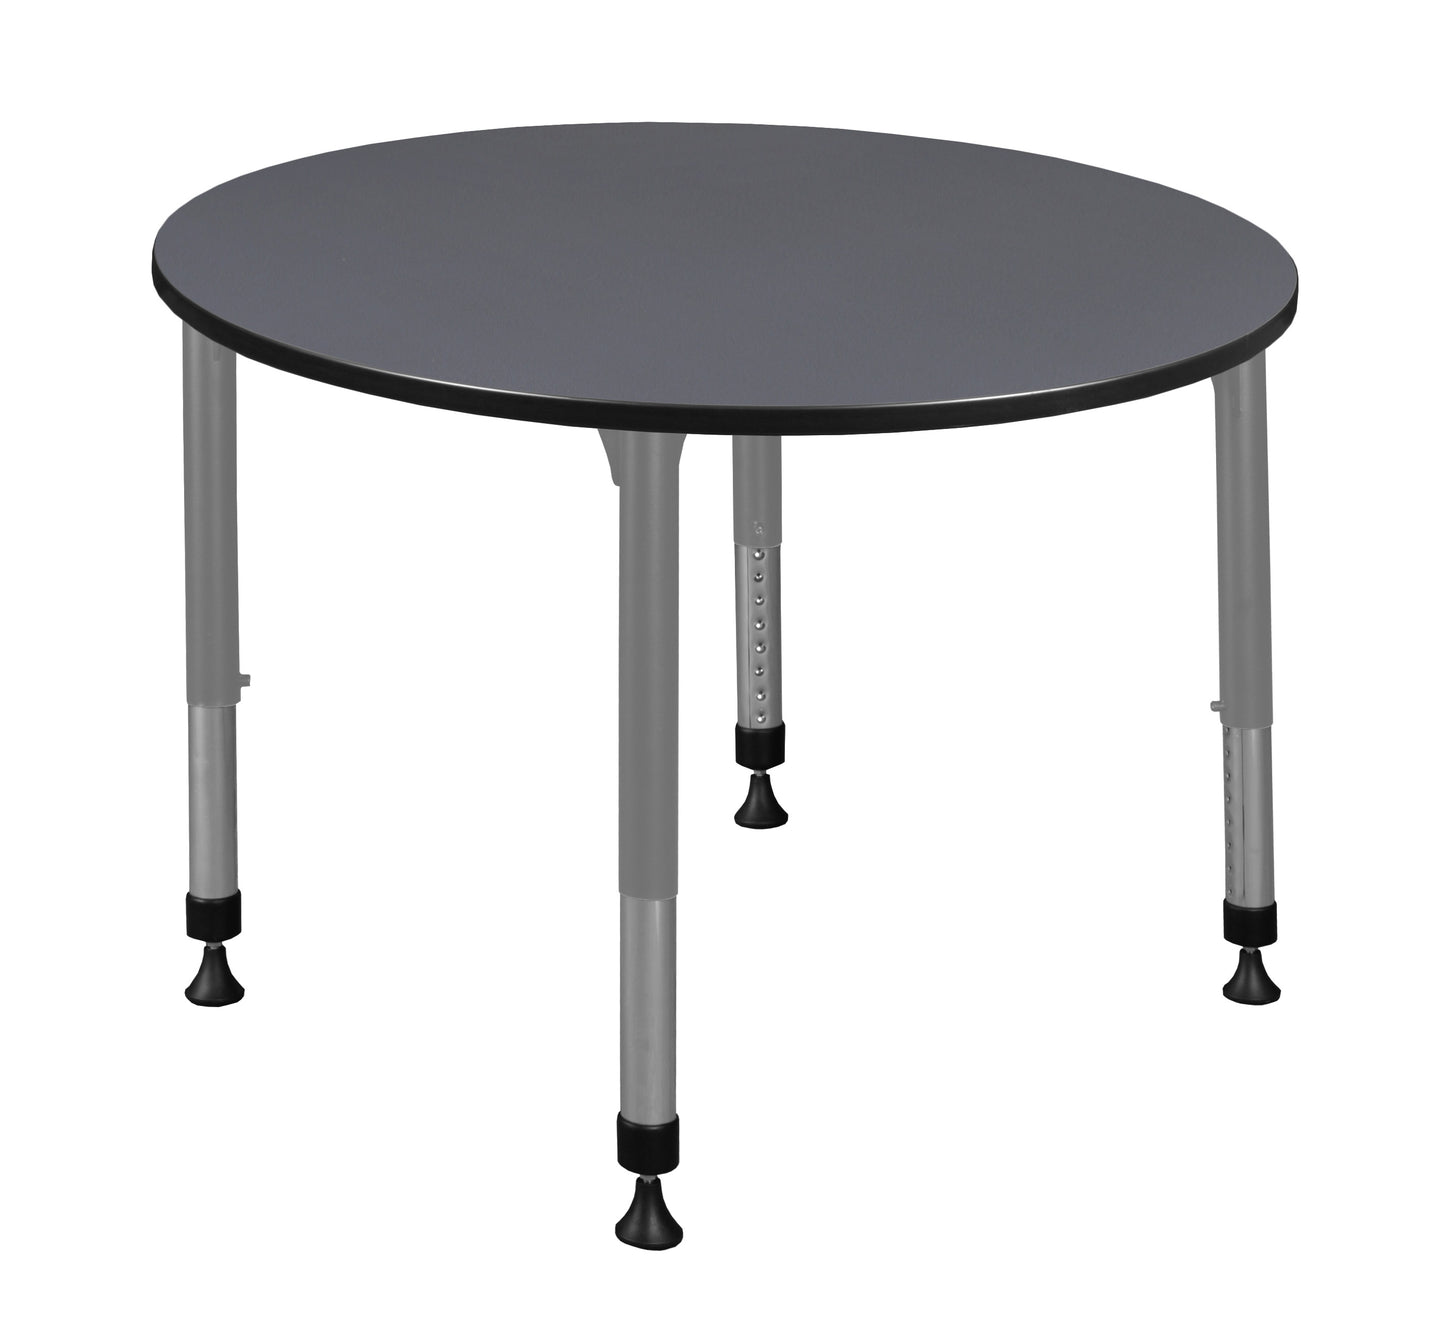 Regency Kee 48 in. Round Height Adjustable Mobile Classroom Activity Table